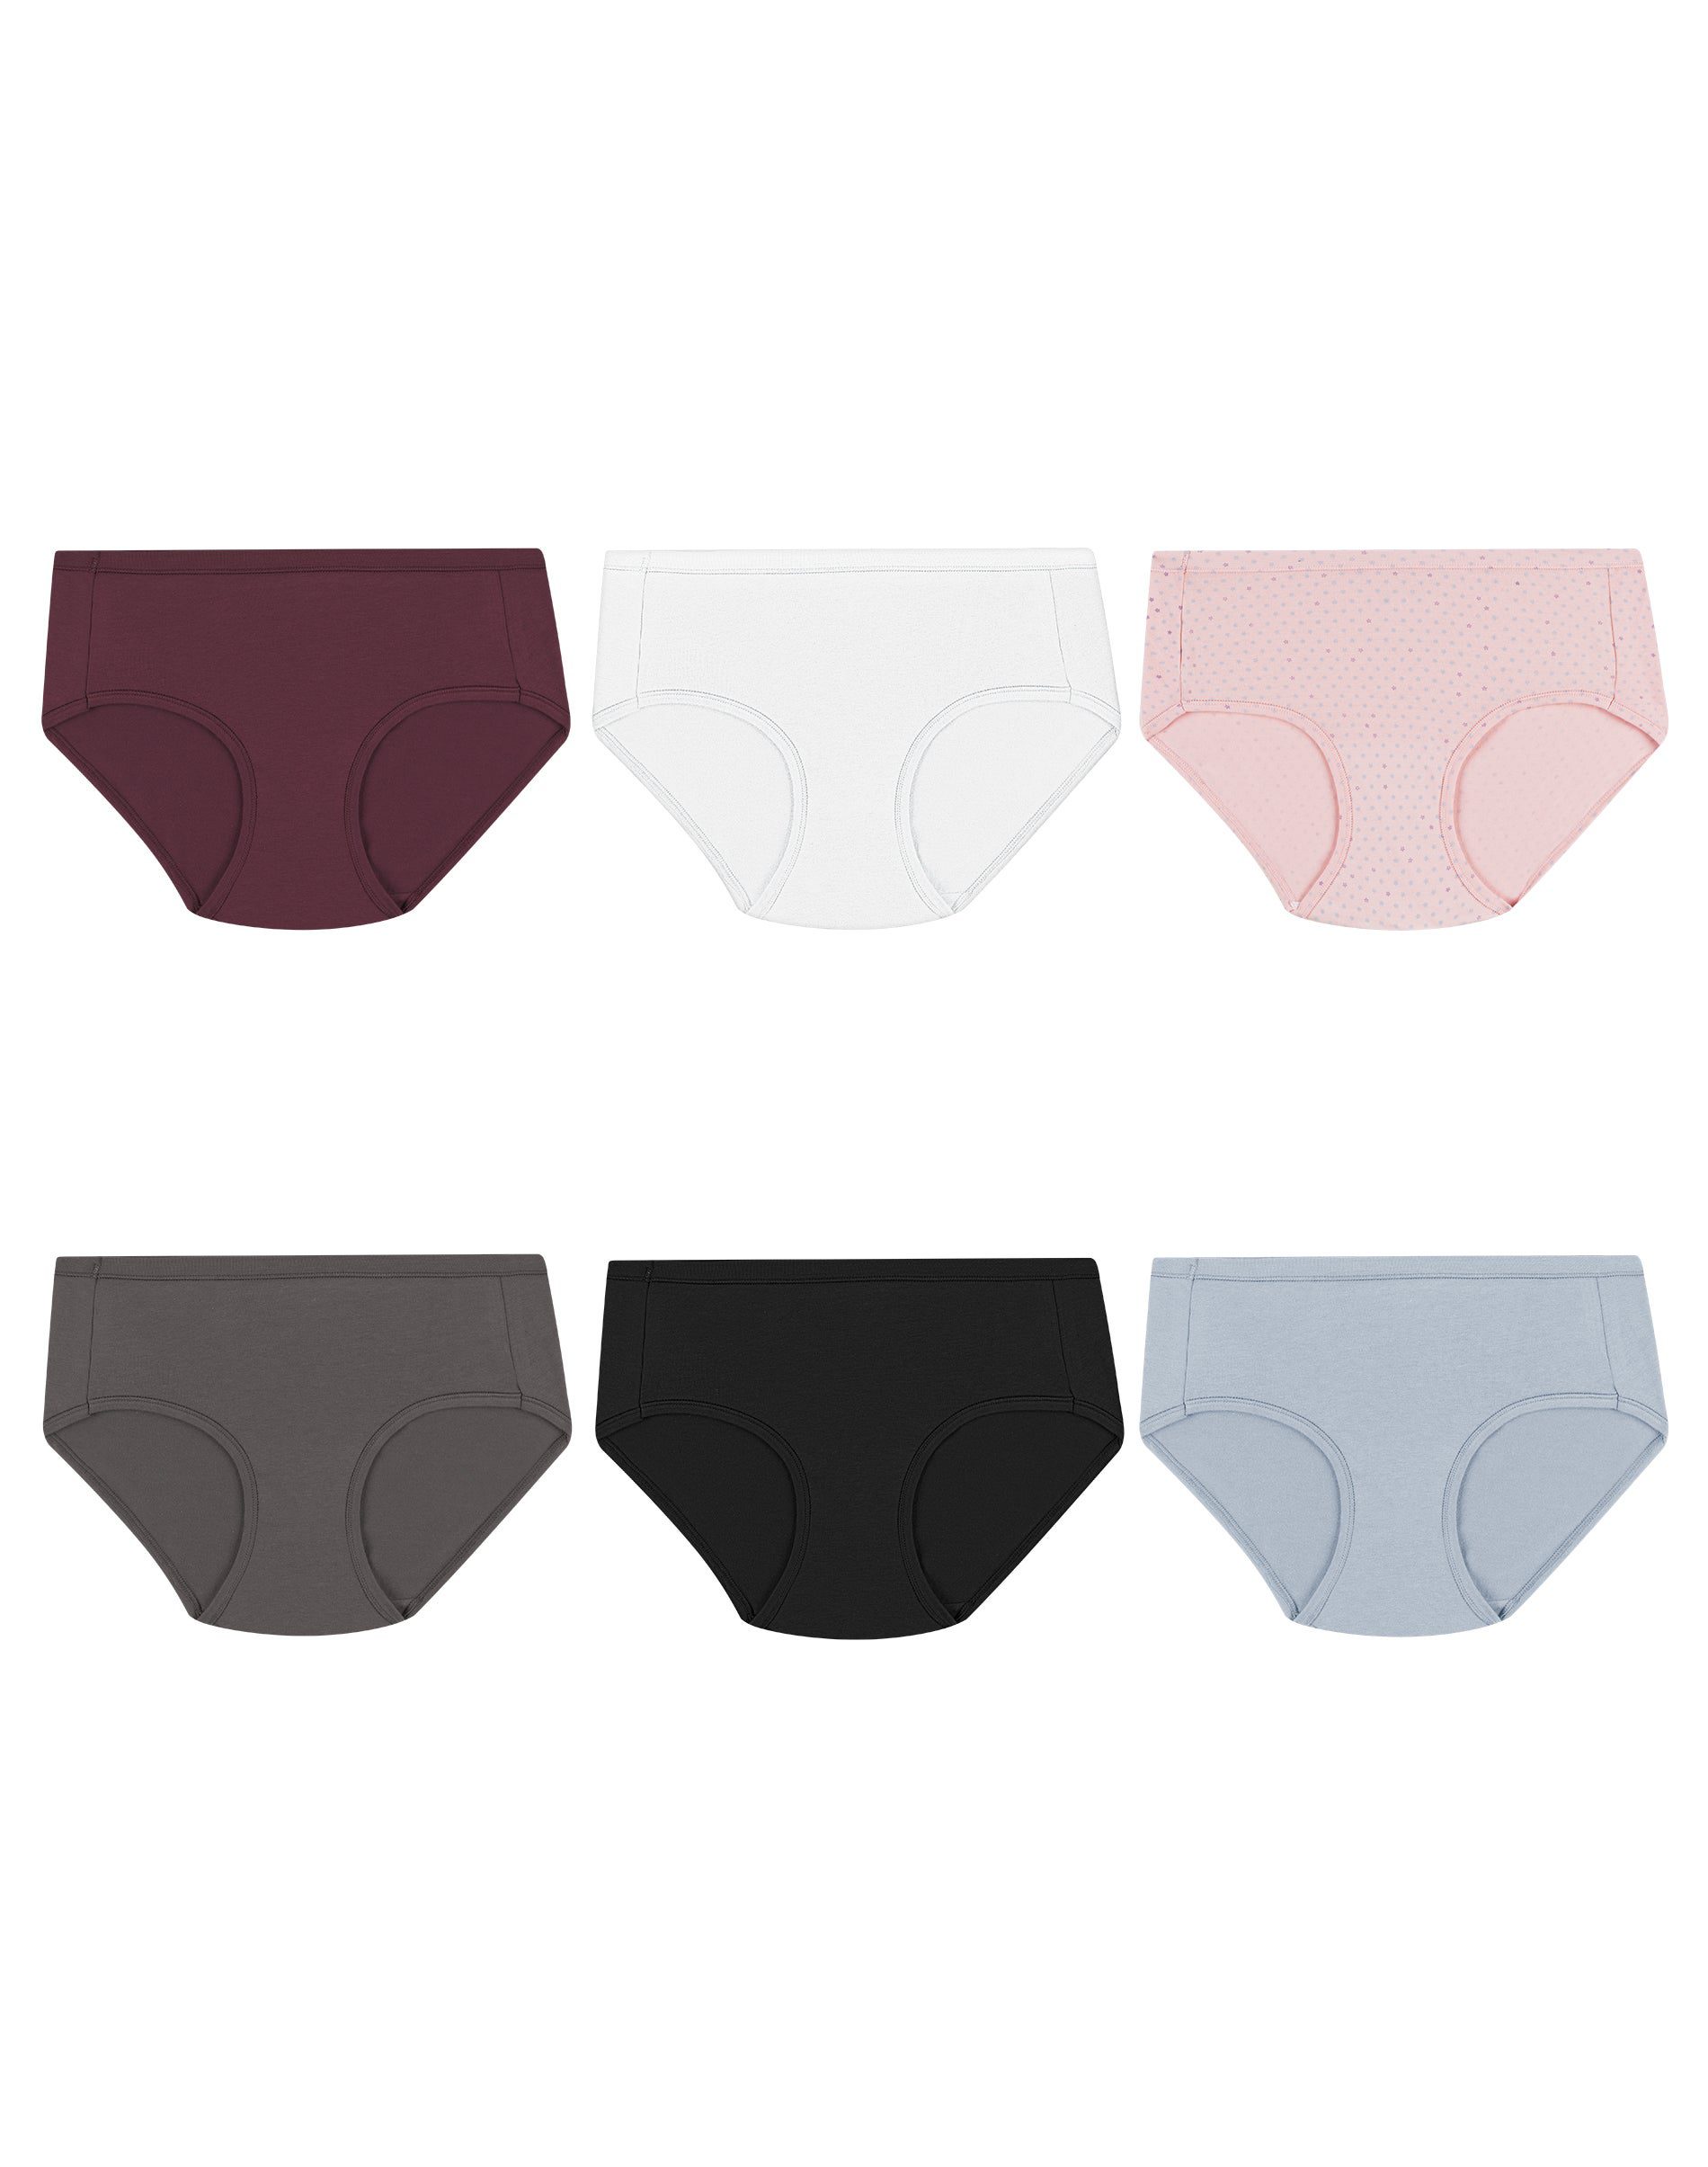 Hanes Women's 6 Pack Cotton Low Rise Brief Panty, Assorted